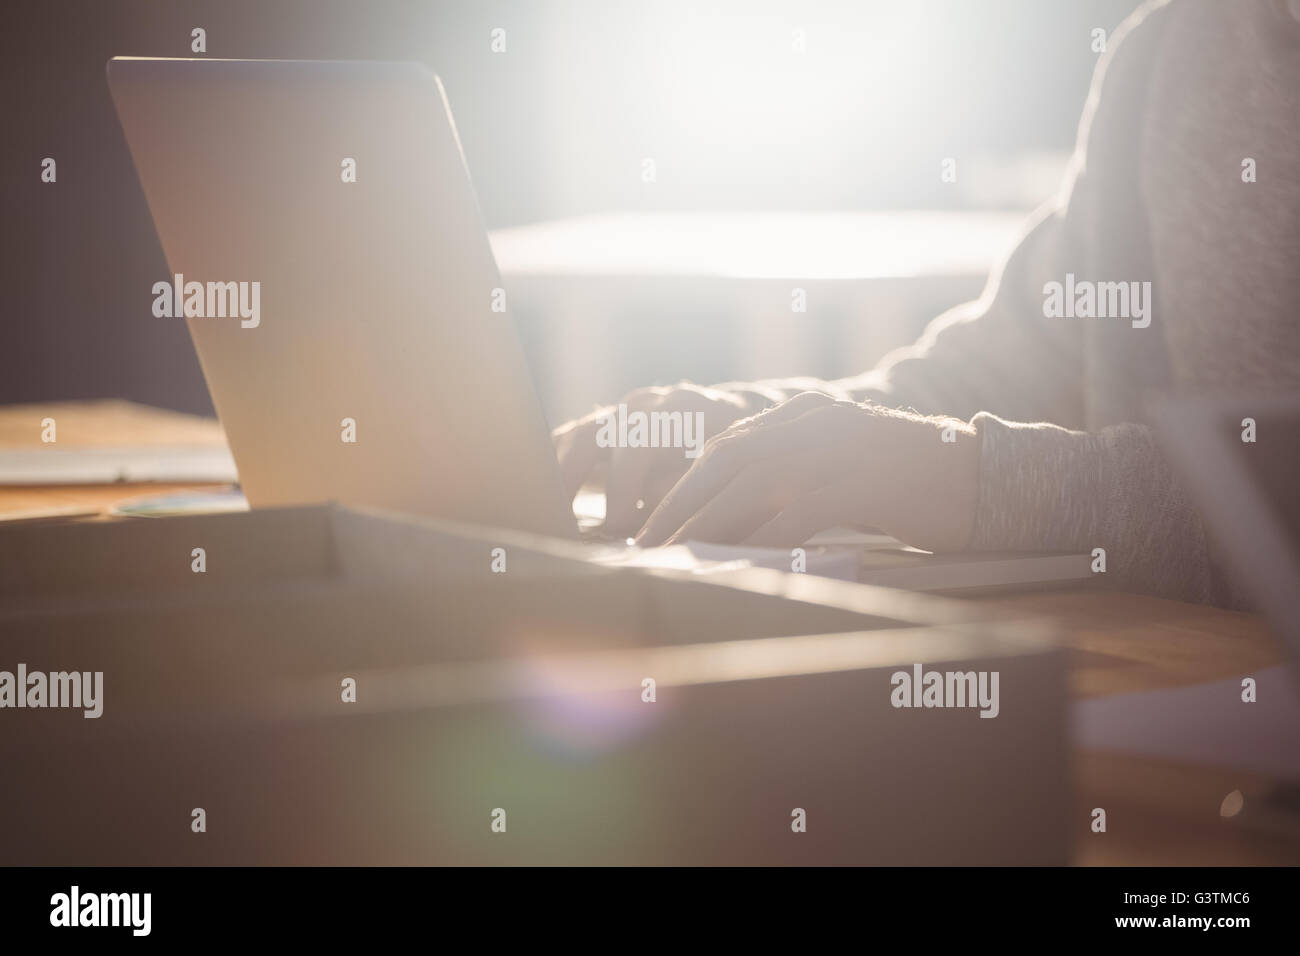 Hands typing on a computer Stock Photo